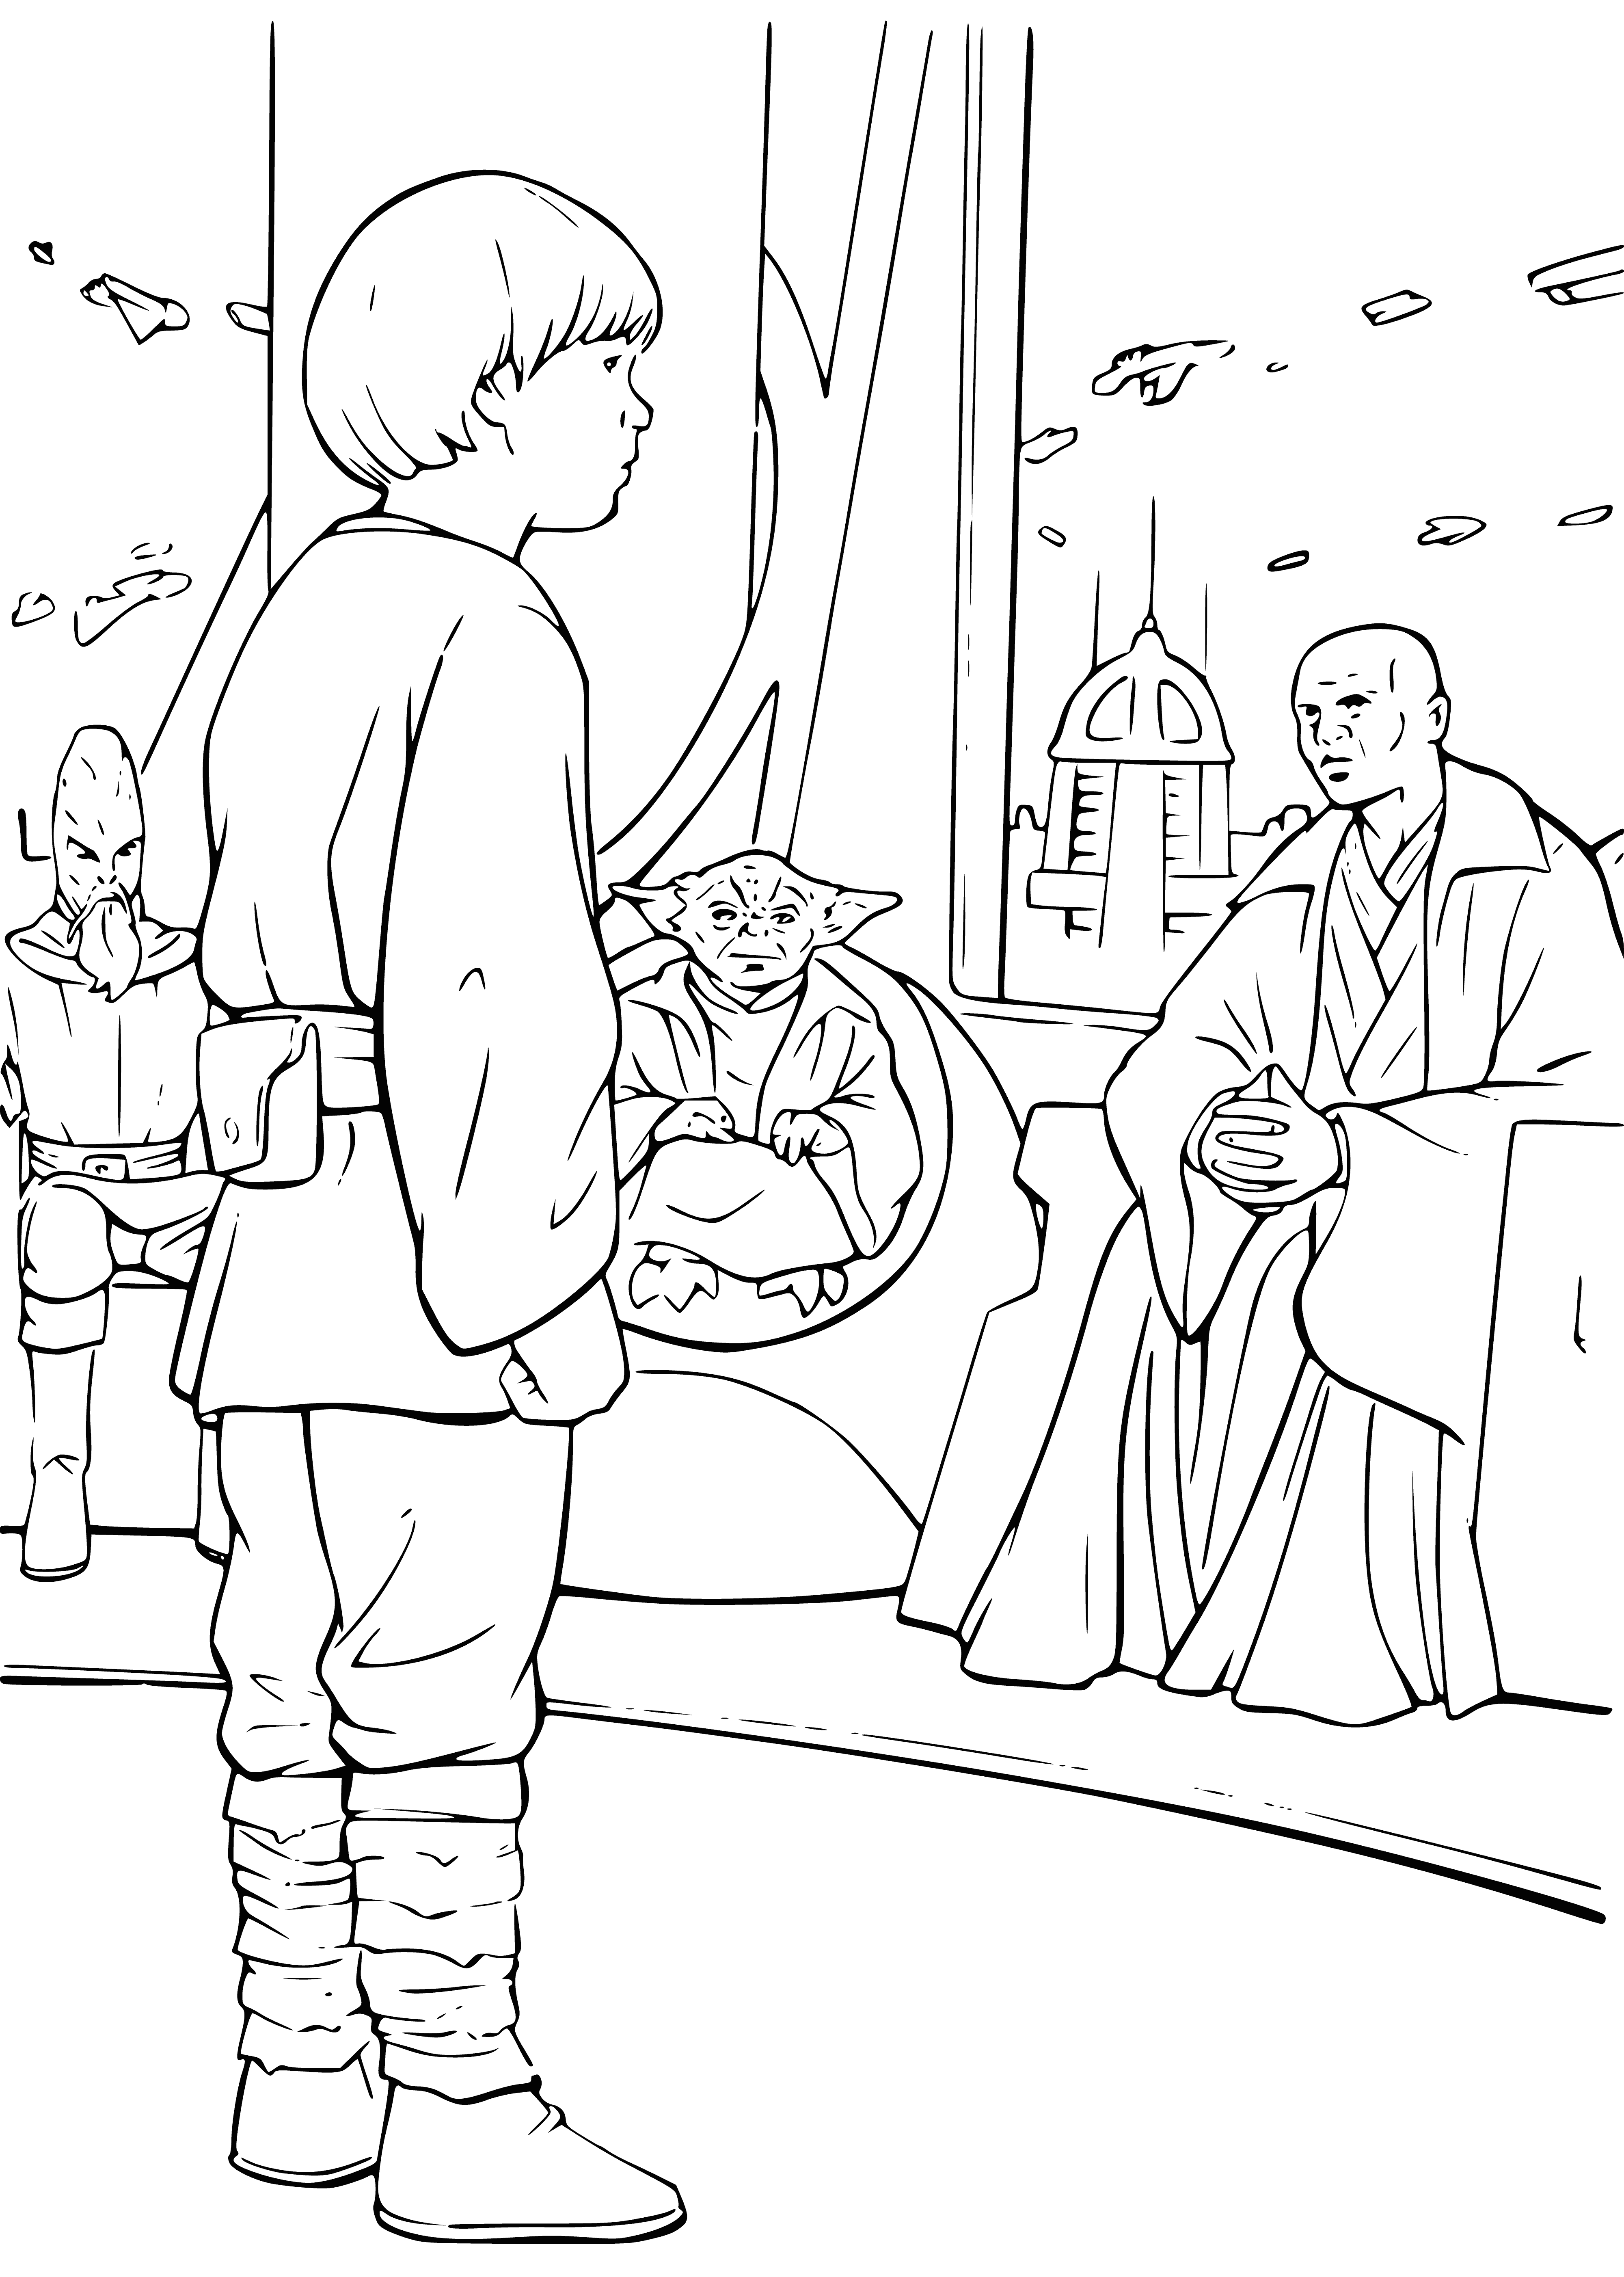 Anakin on the Jedi Council coloring page